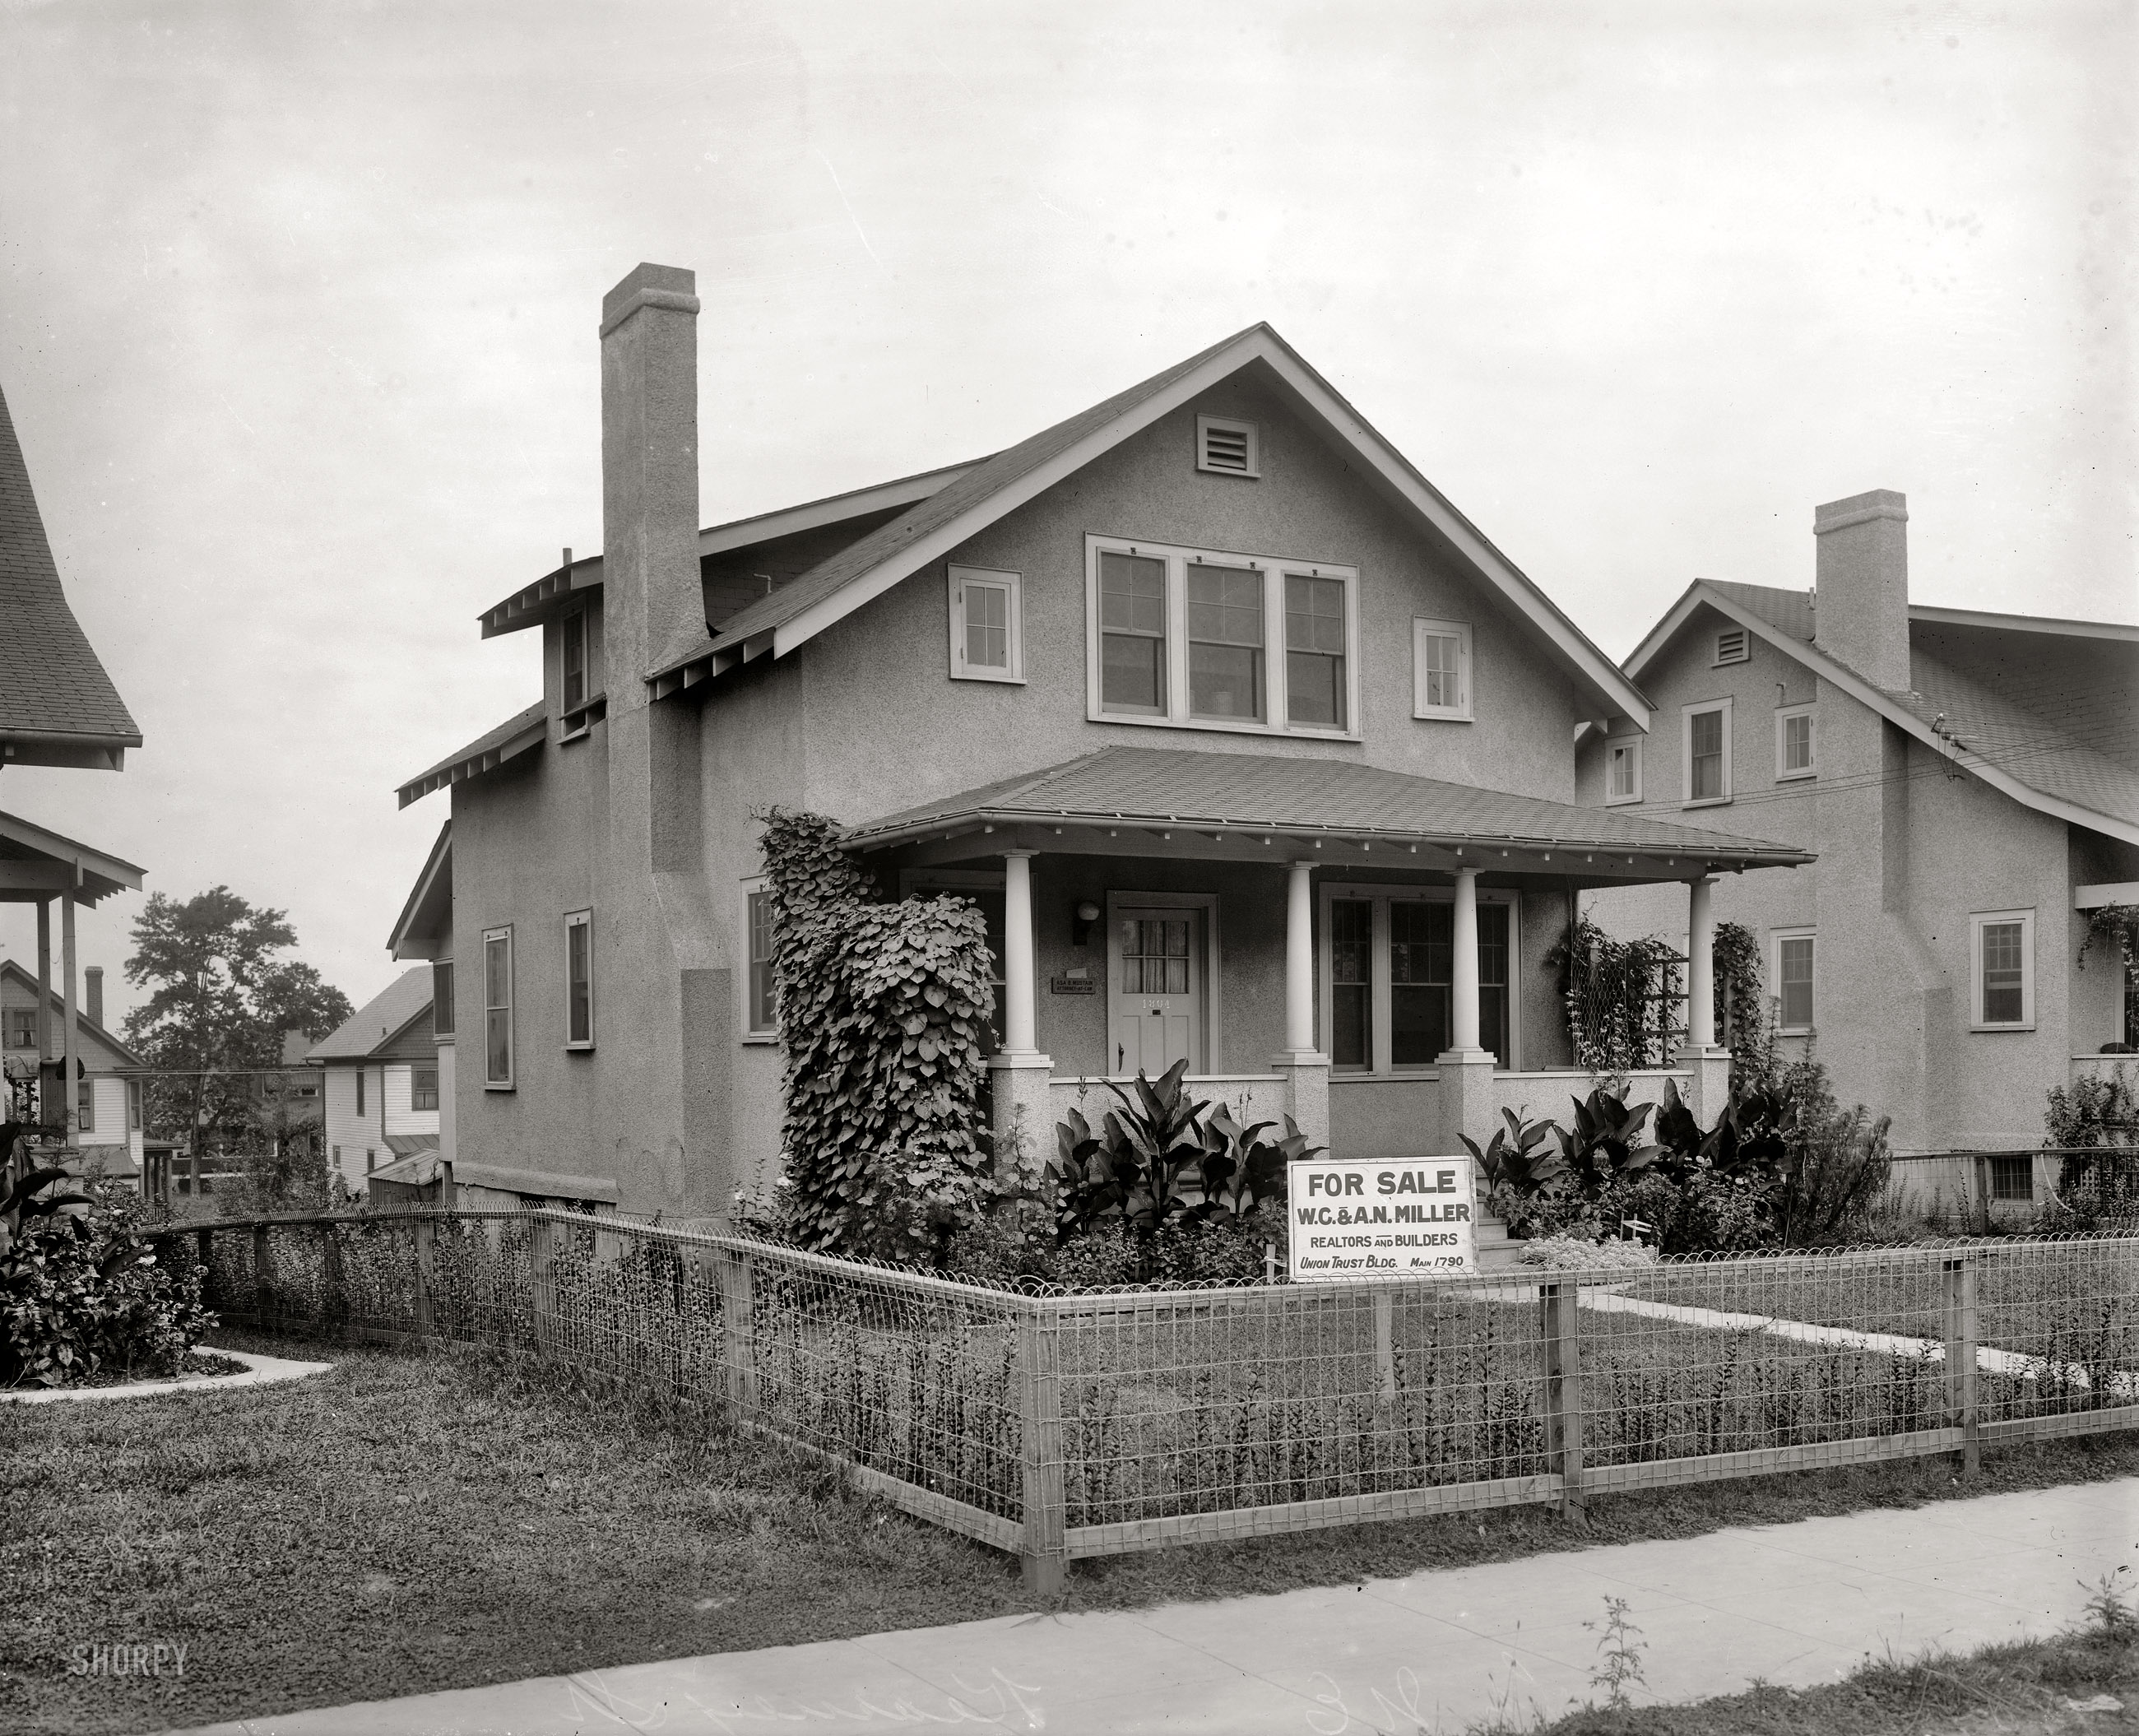 Washington, D.C., circa 1921. "1804 Kearney Street N.E." If only these walls could talk. National Photo Company Collection glass negative. View full size.